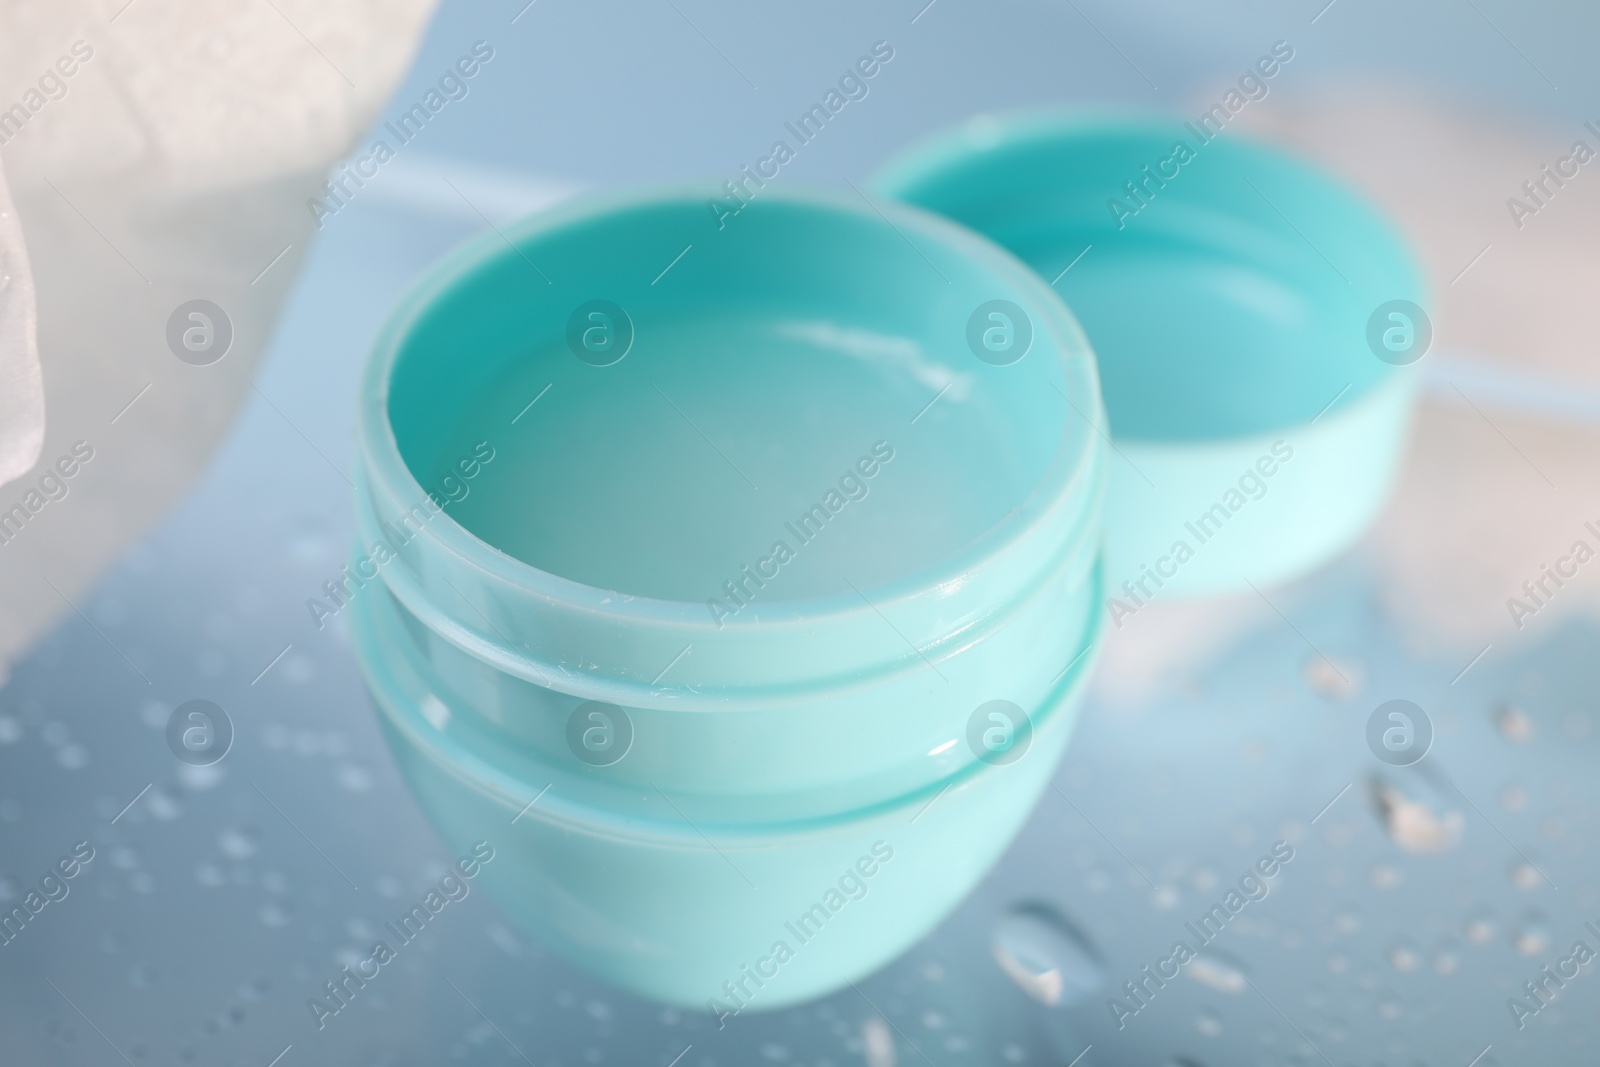 Photo of Lip balm and water drops on glass surface, closeup